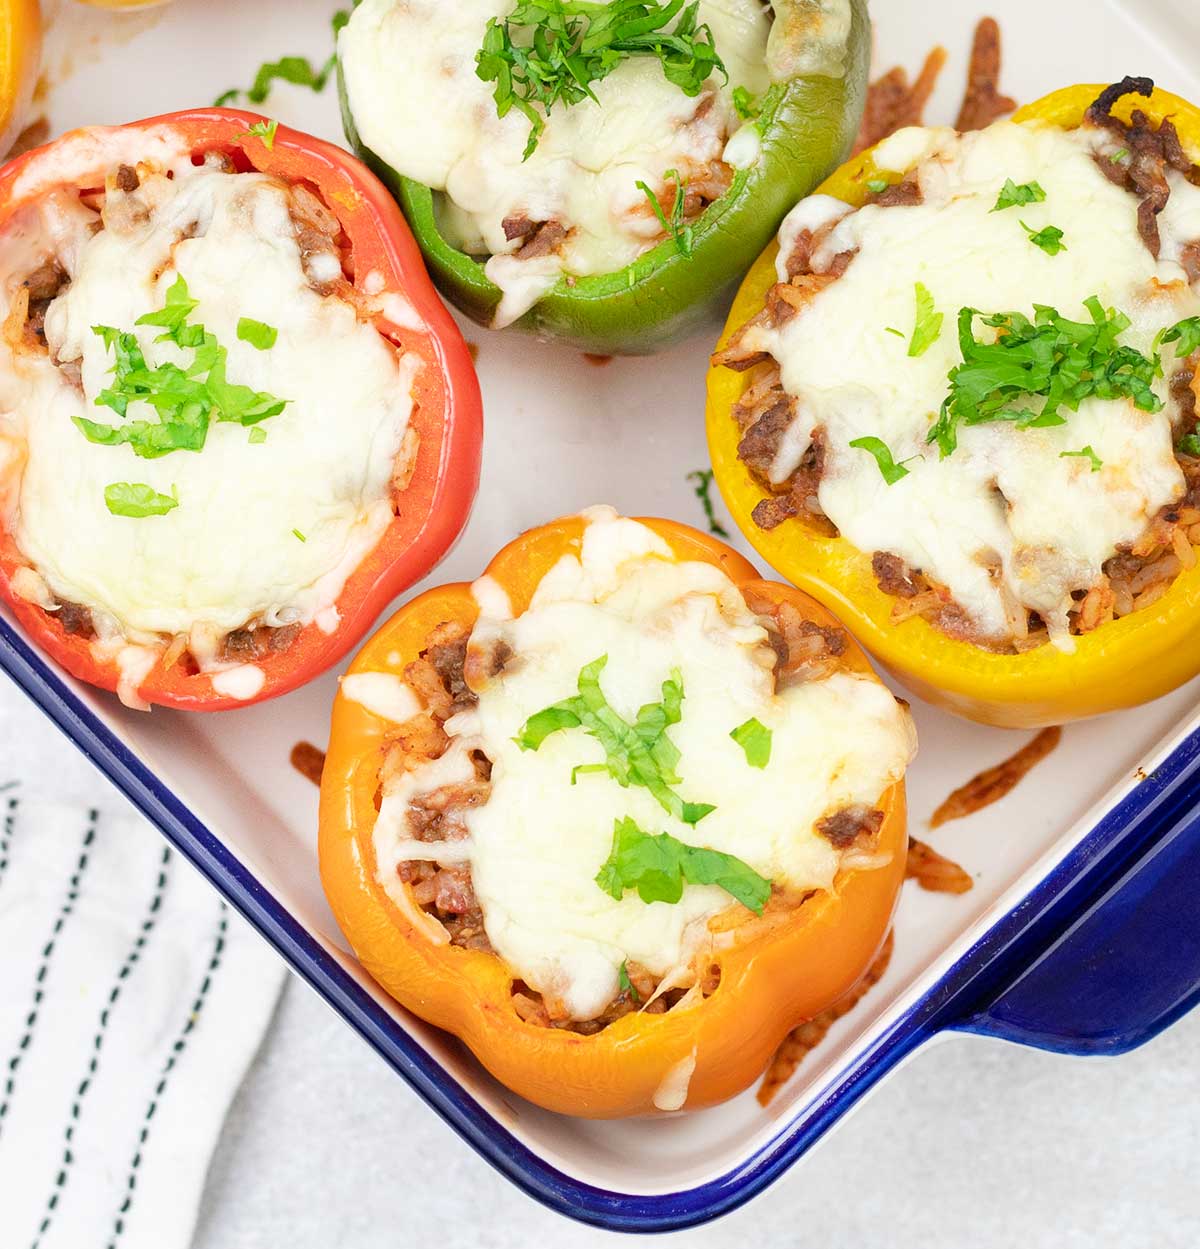 Baked stuffed bell peppers with rice and ground beef in a baking pan.